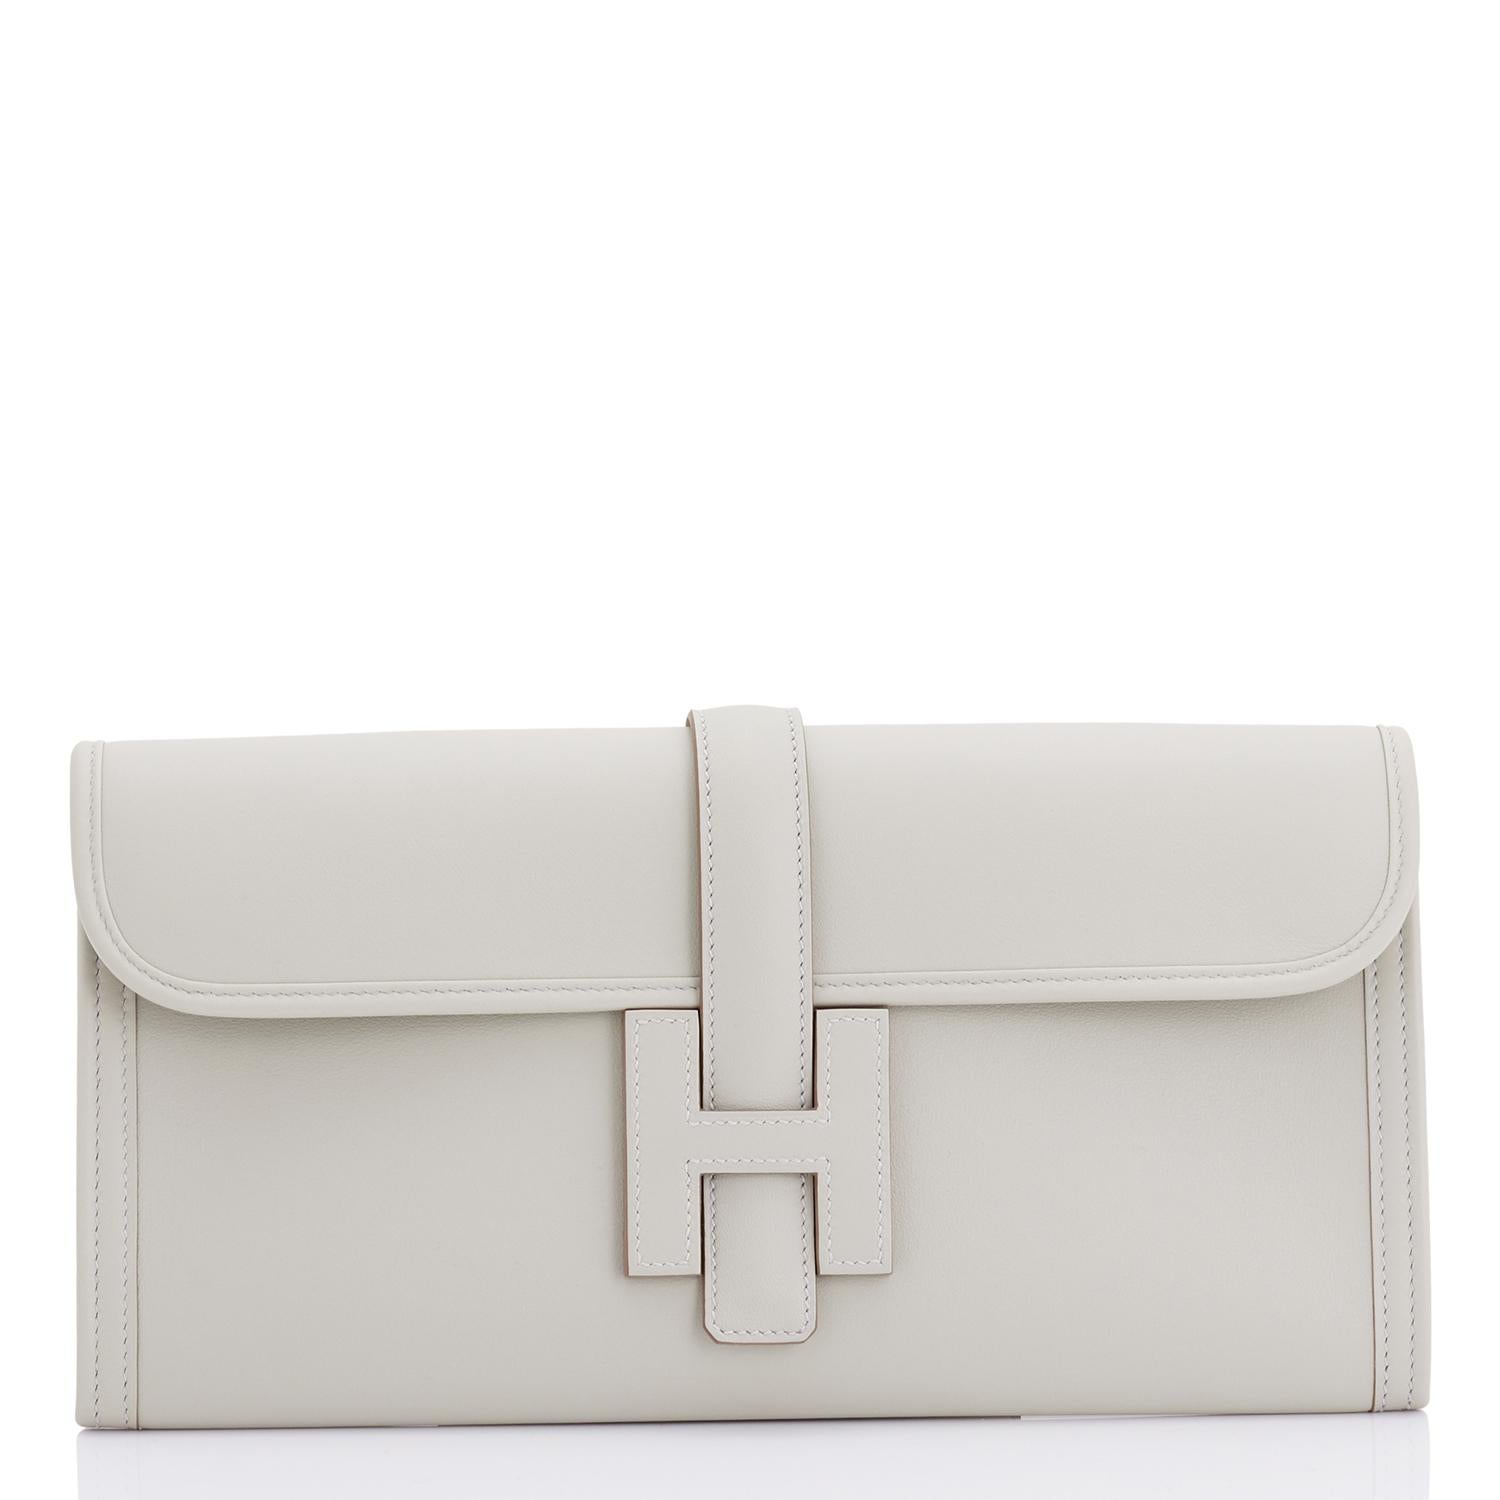 Hermes Gris Perle Light Pearl Grey Jige Elan Clutch 29cm Elegant
Perfect Gift!  Brand New in Box.  Store Fresh in Pristine condition.  
Comes in full set with Hermes dust bag, Hermes ribbon, and Hermes box.
Gris Perle or Pearl Grey is one of the